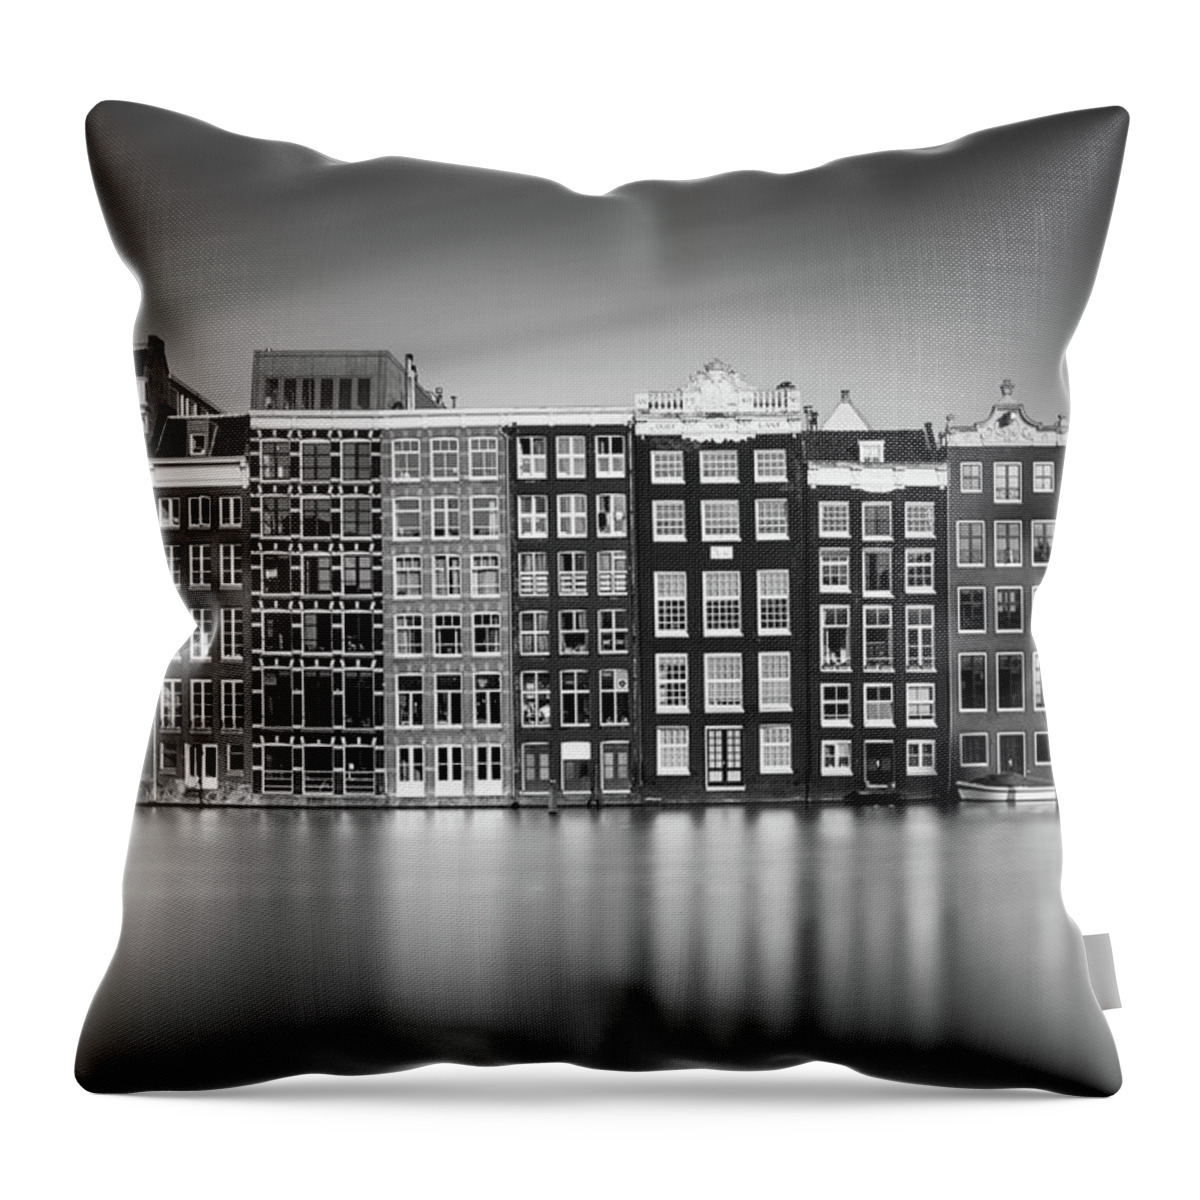 Amsterdam Throw Pillow featuring the photograph Amsterdam, Damrak I by Ivo Kerssemakers